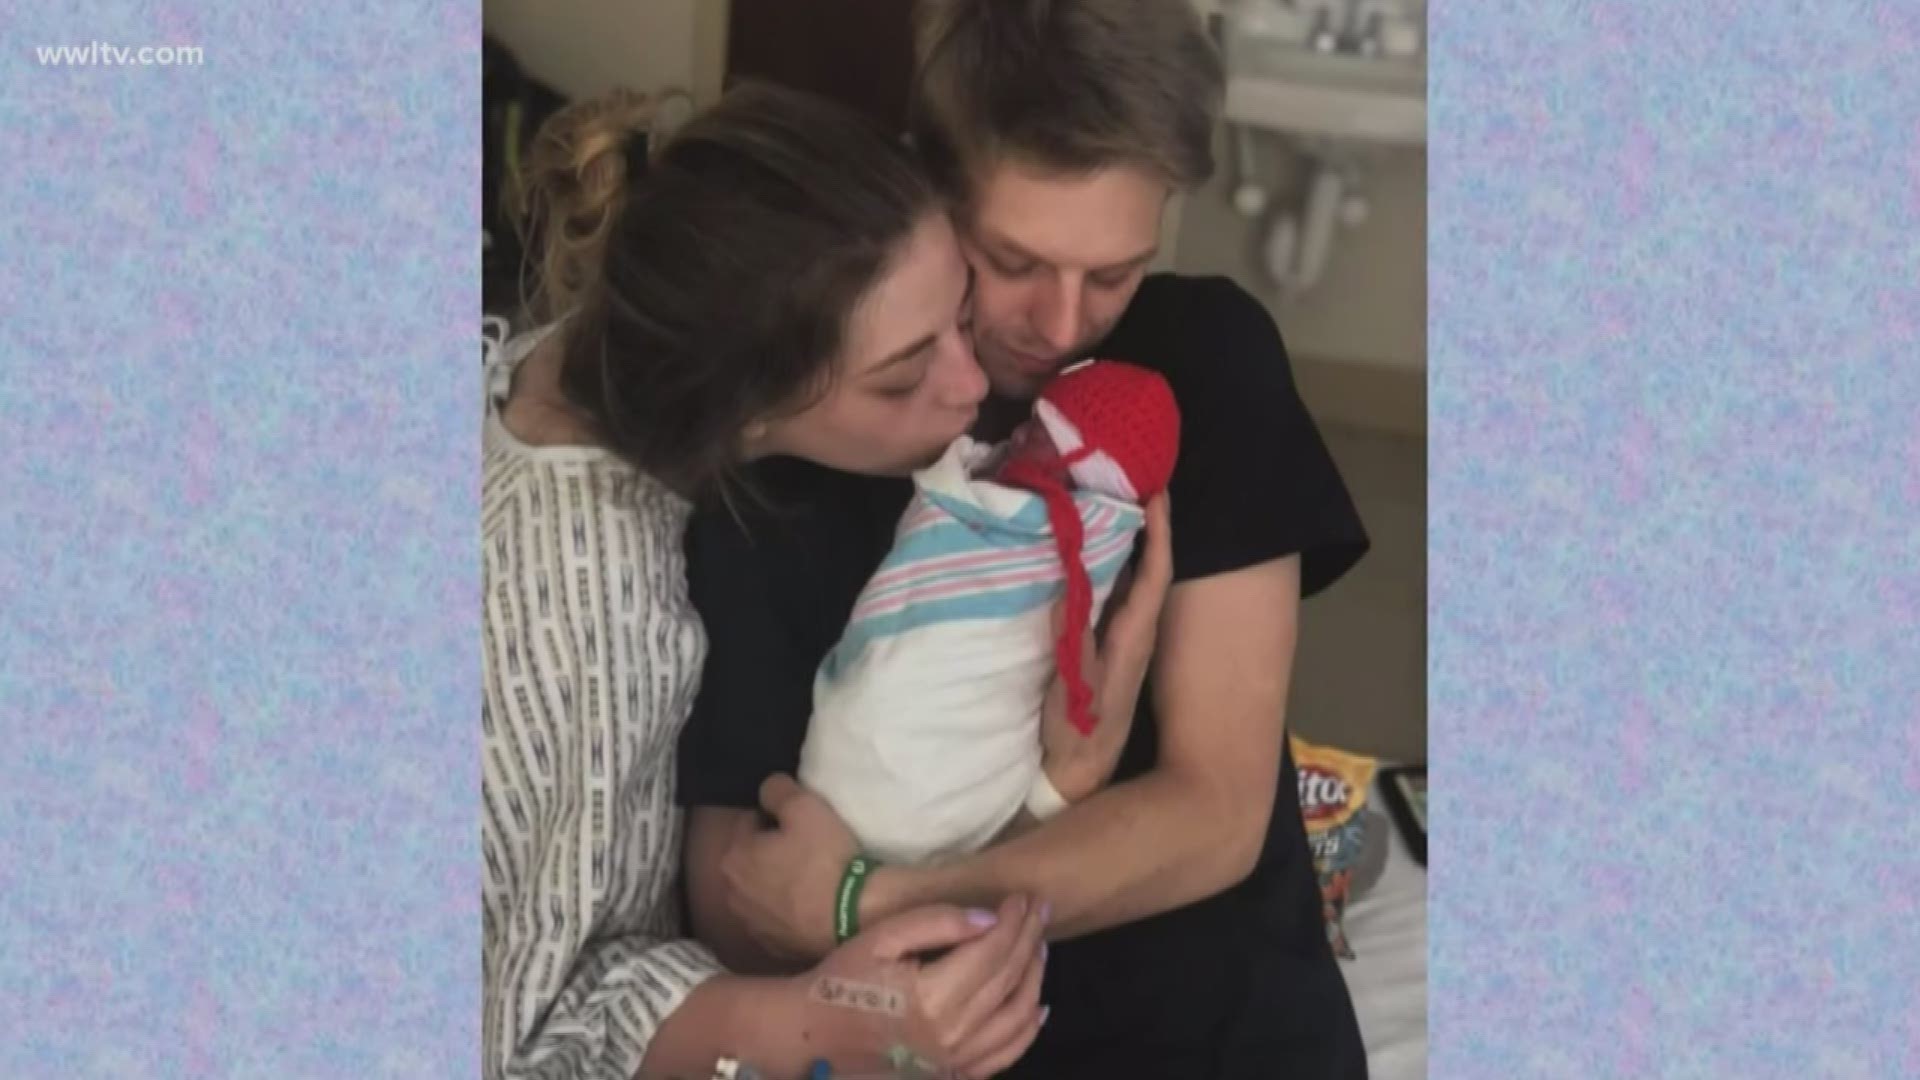 When a mom and dad lost their newborn, they wanted to bring awareness to a brain birth defect and how taking folic acid might help prevent the heartache they are going through.